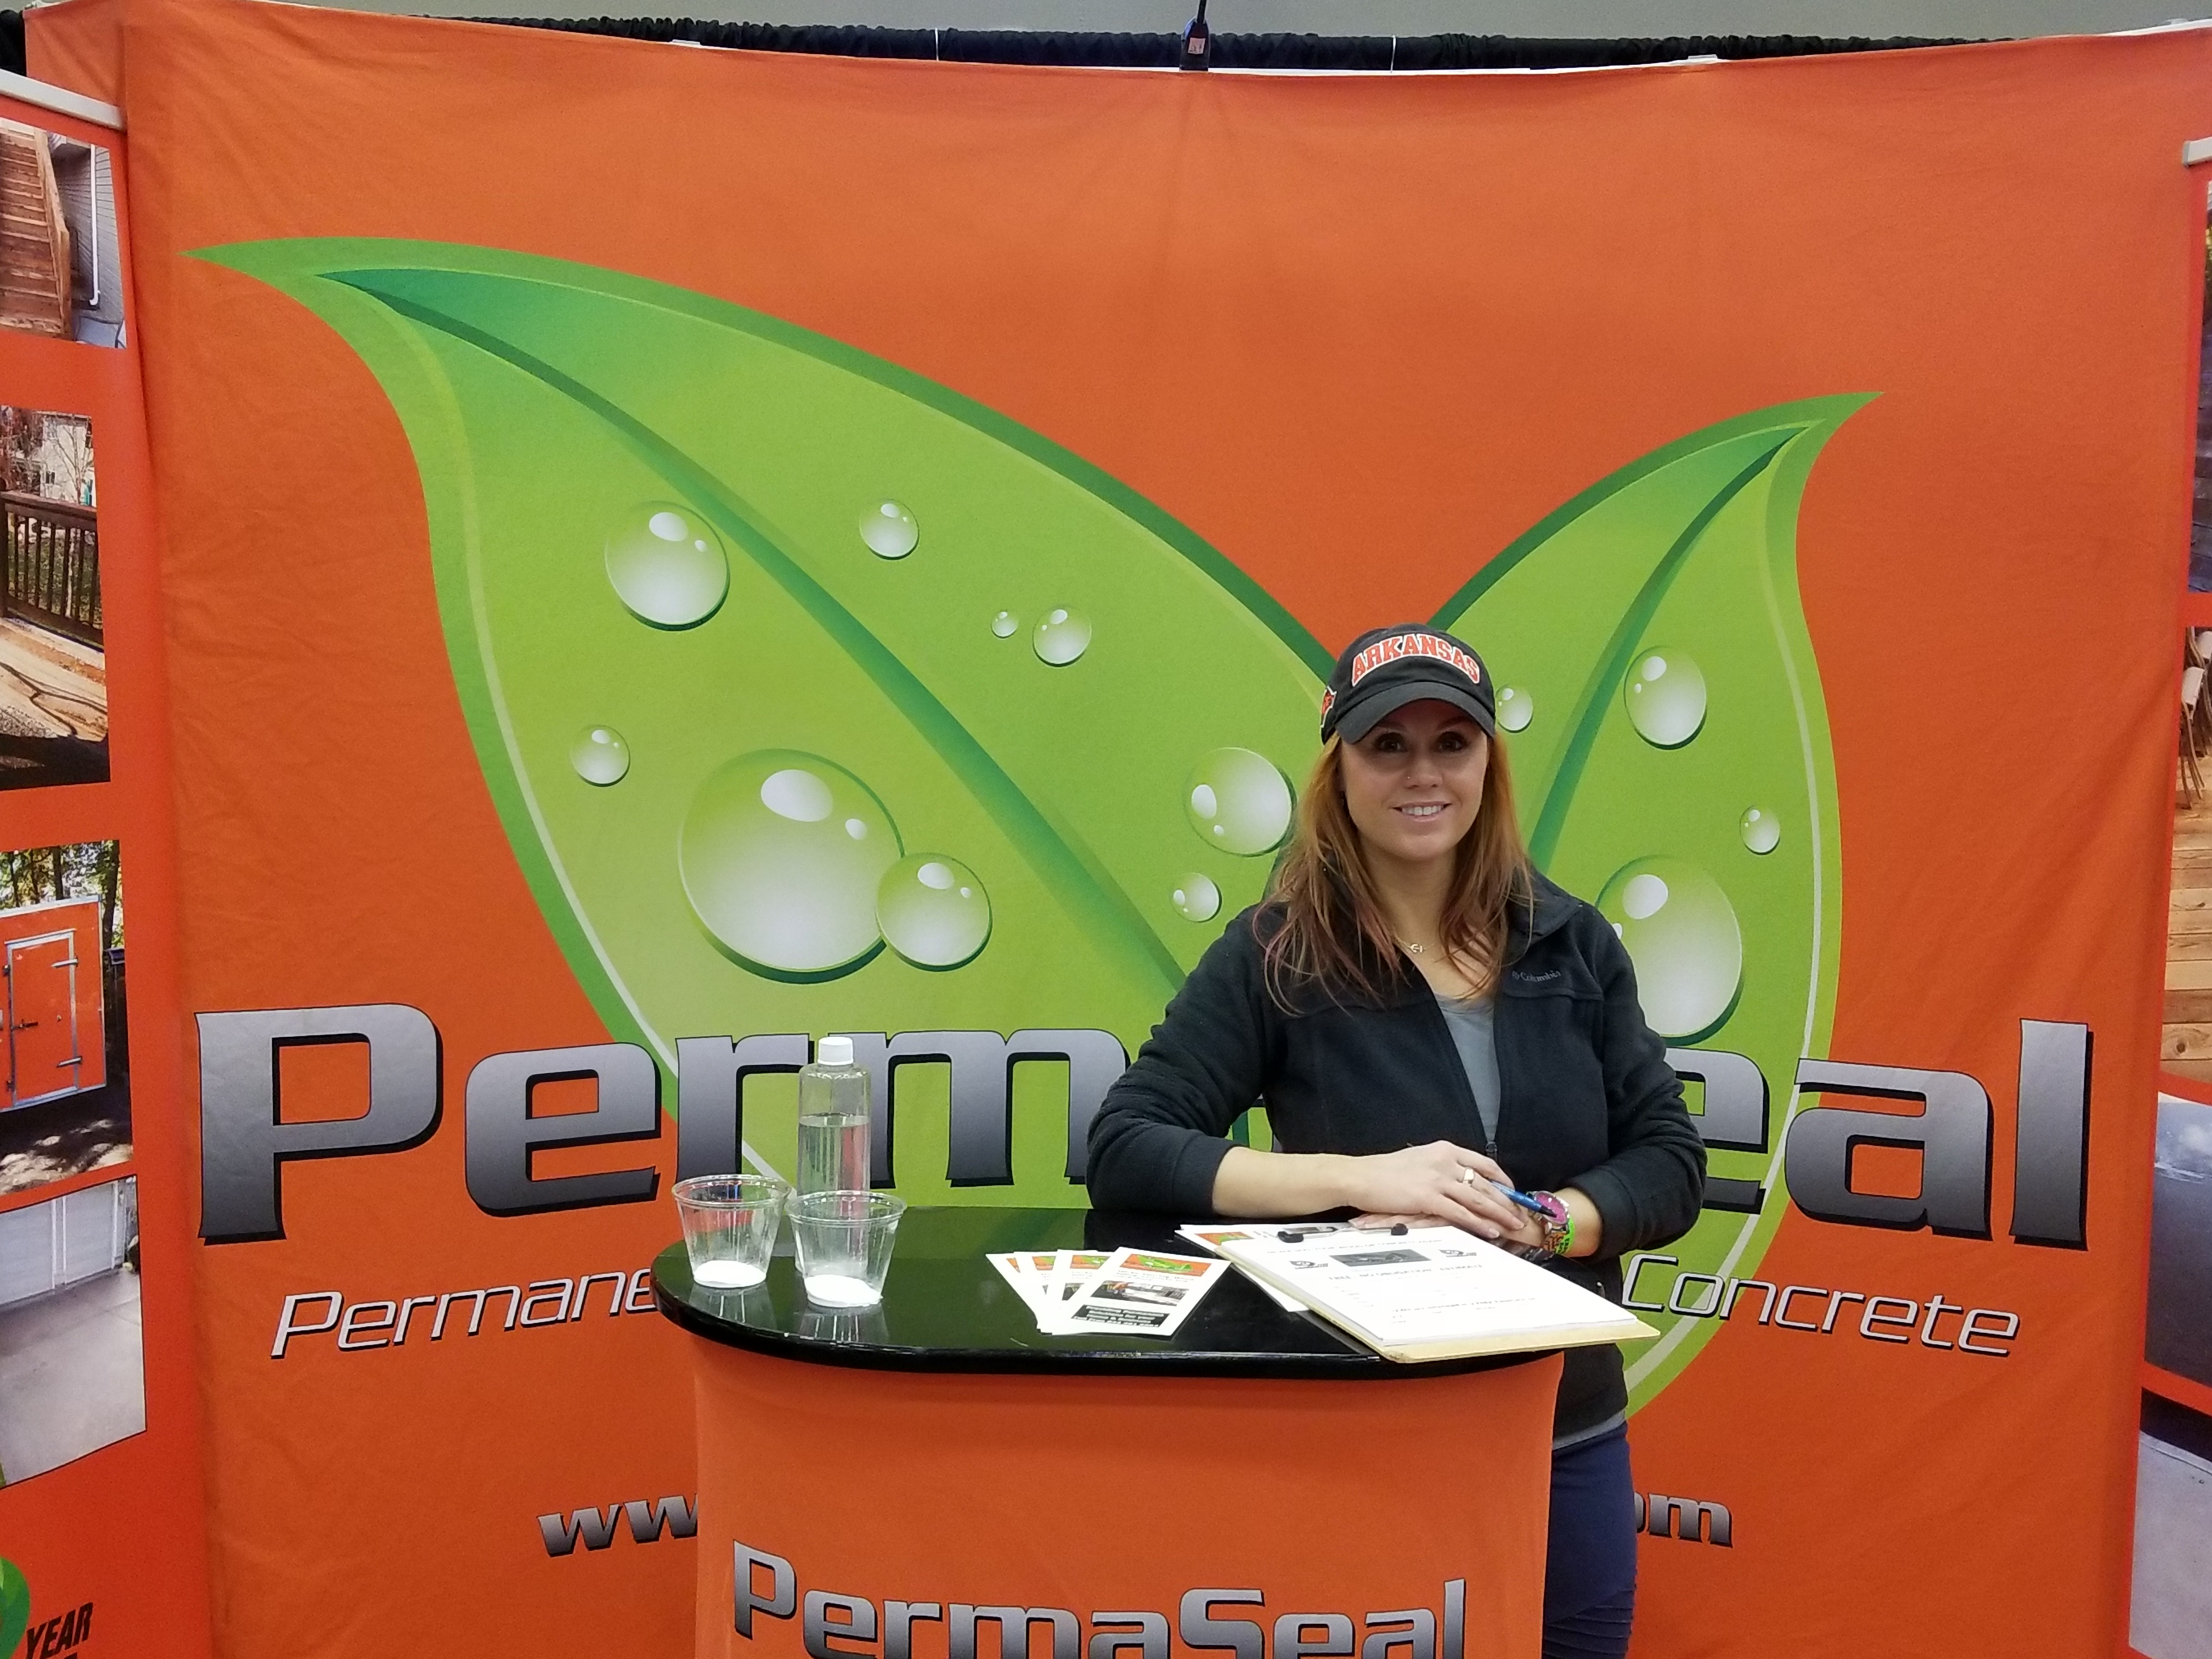 PermaSeal on hand with lots of information